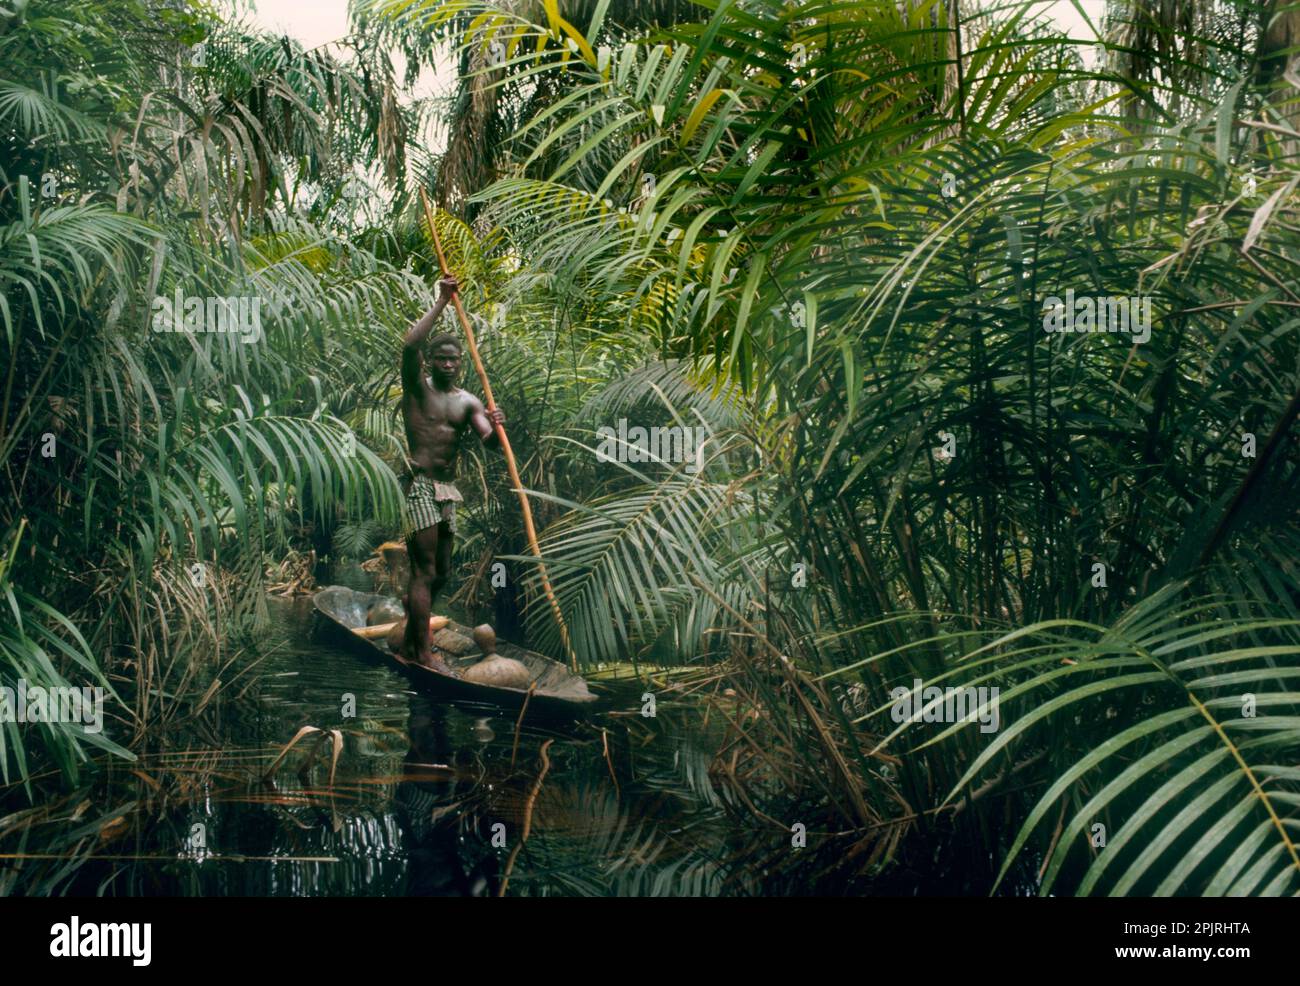 Africa, Libinza ethnic group, Ngiri River islands, Democratic Republic of the Congo. Man propelling canoe with pole in raphia palm swamp forest. Stock Photo